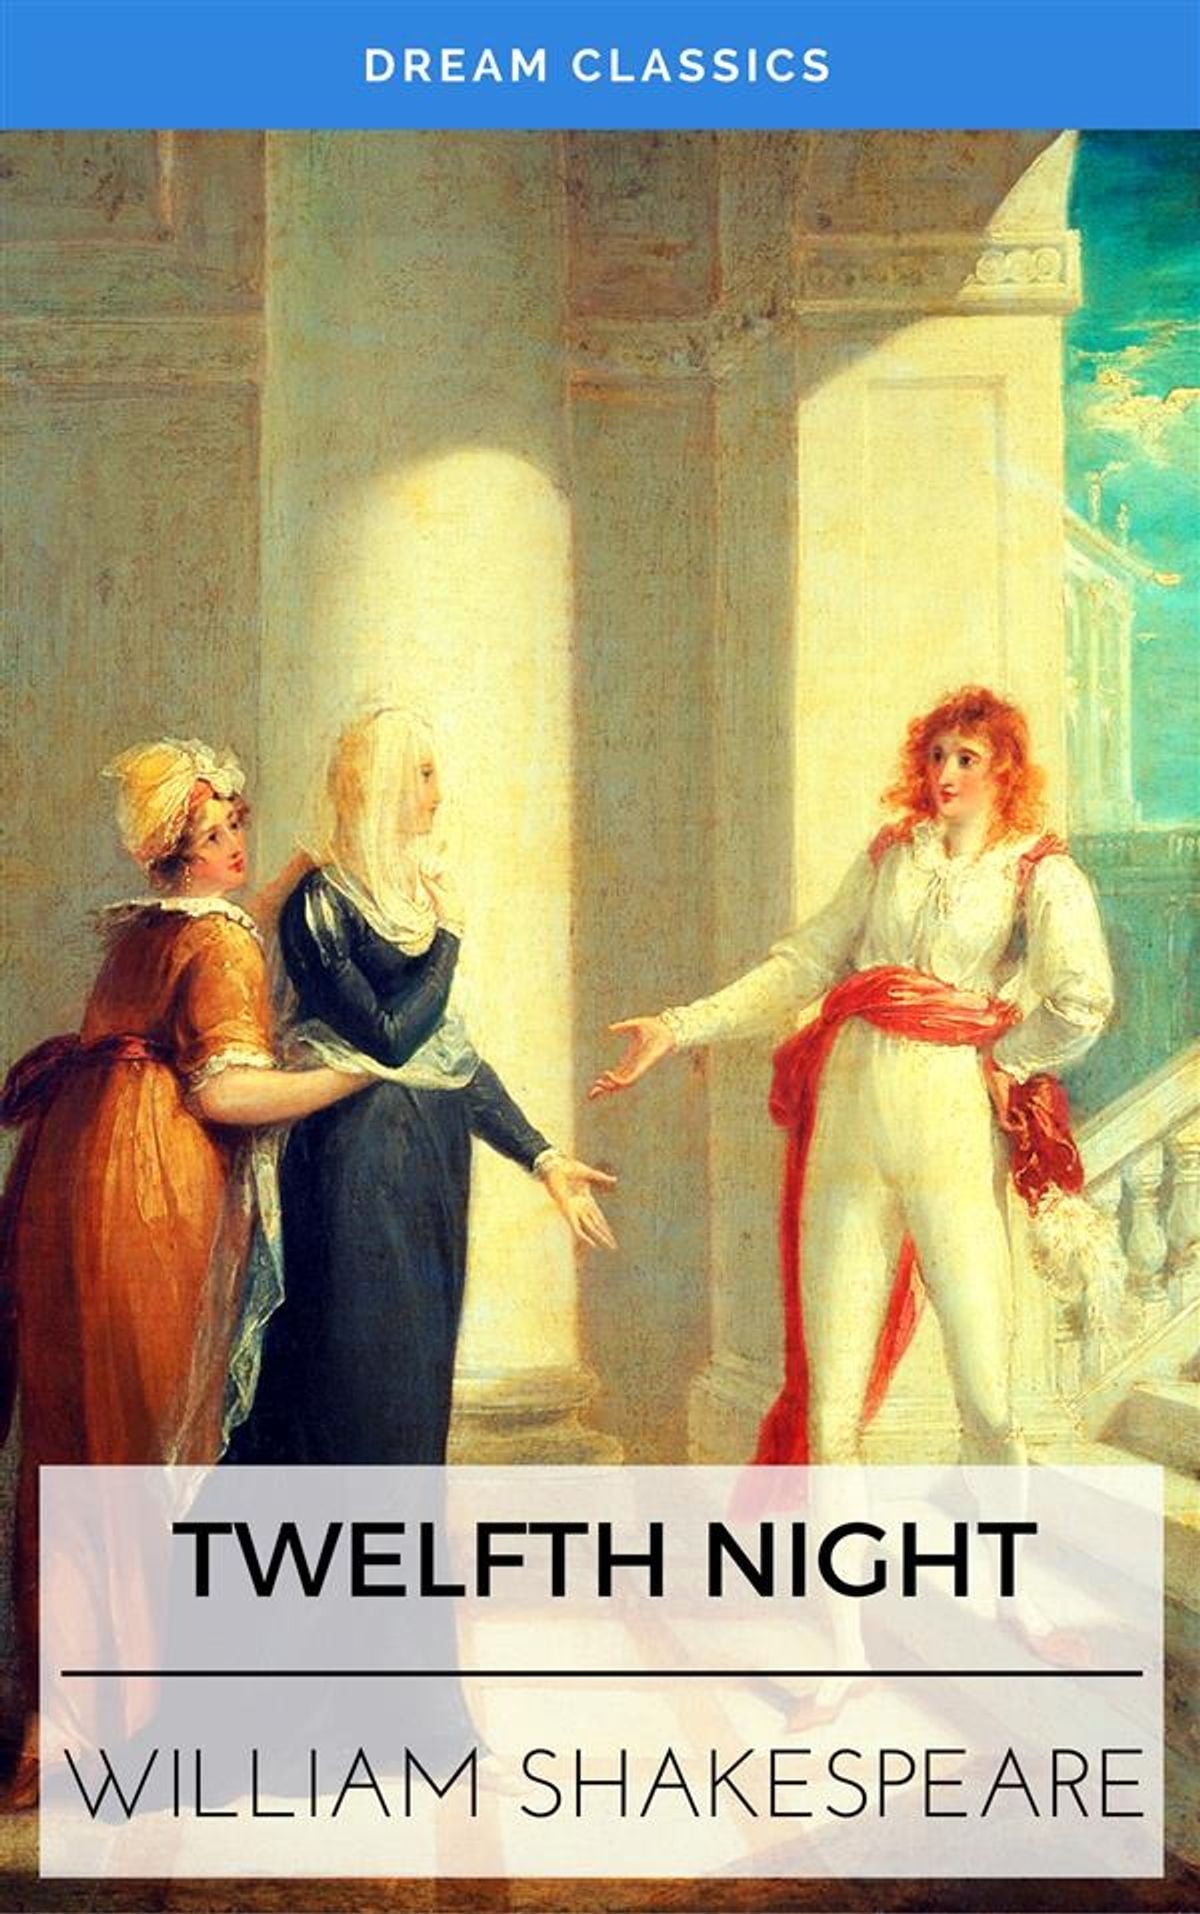 book review of twelfth night